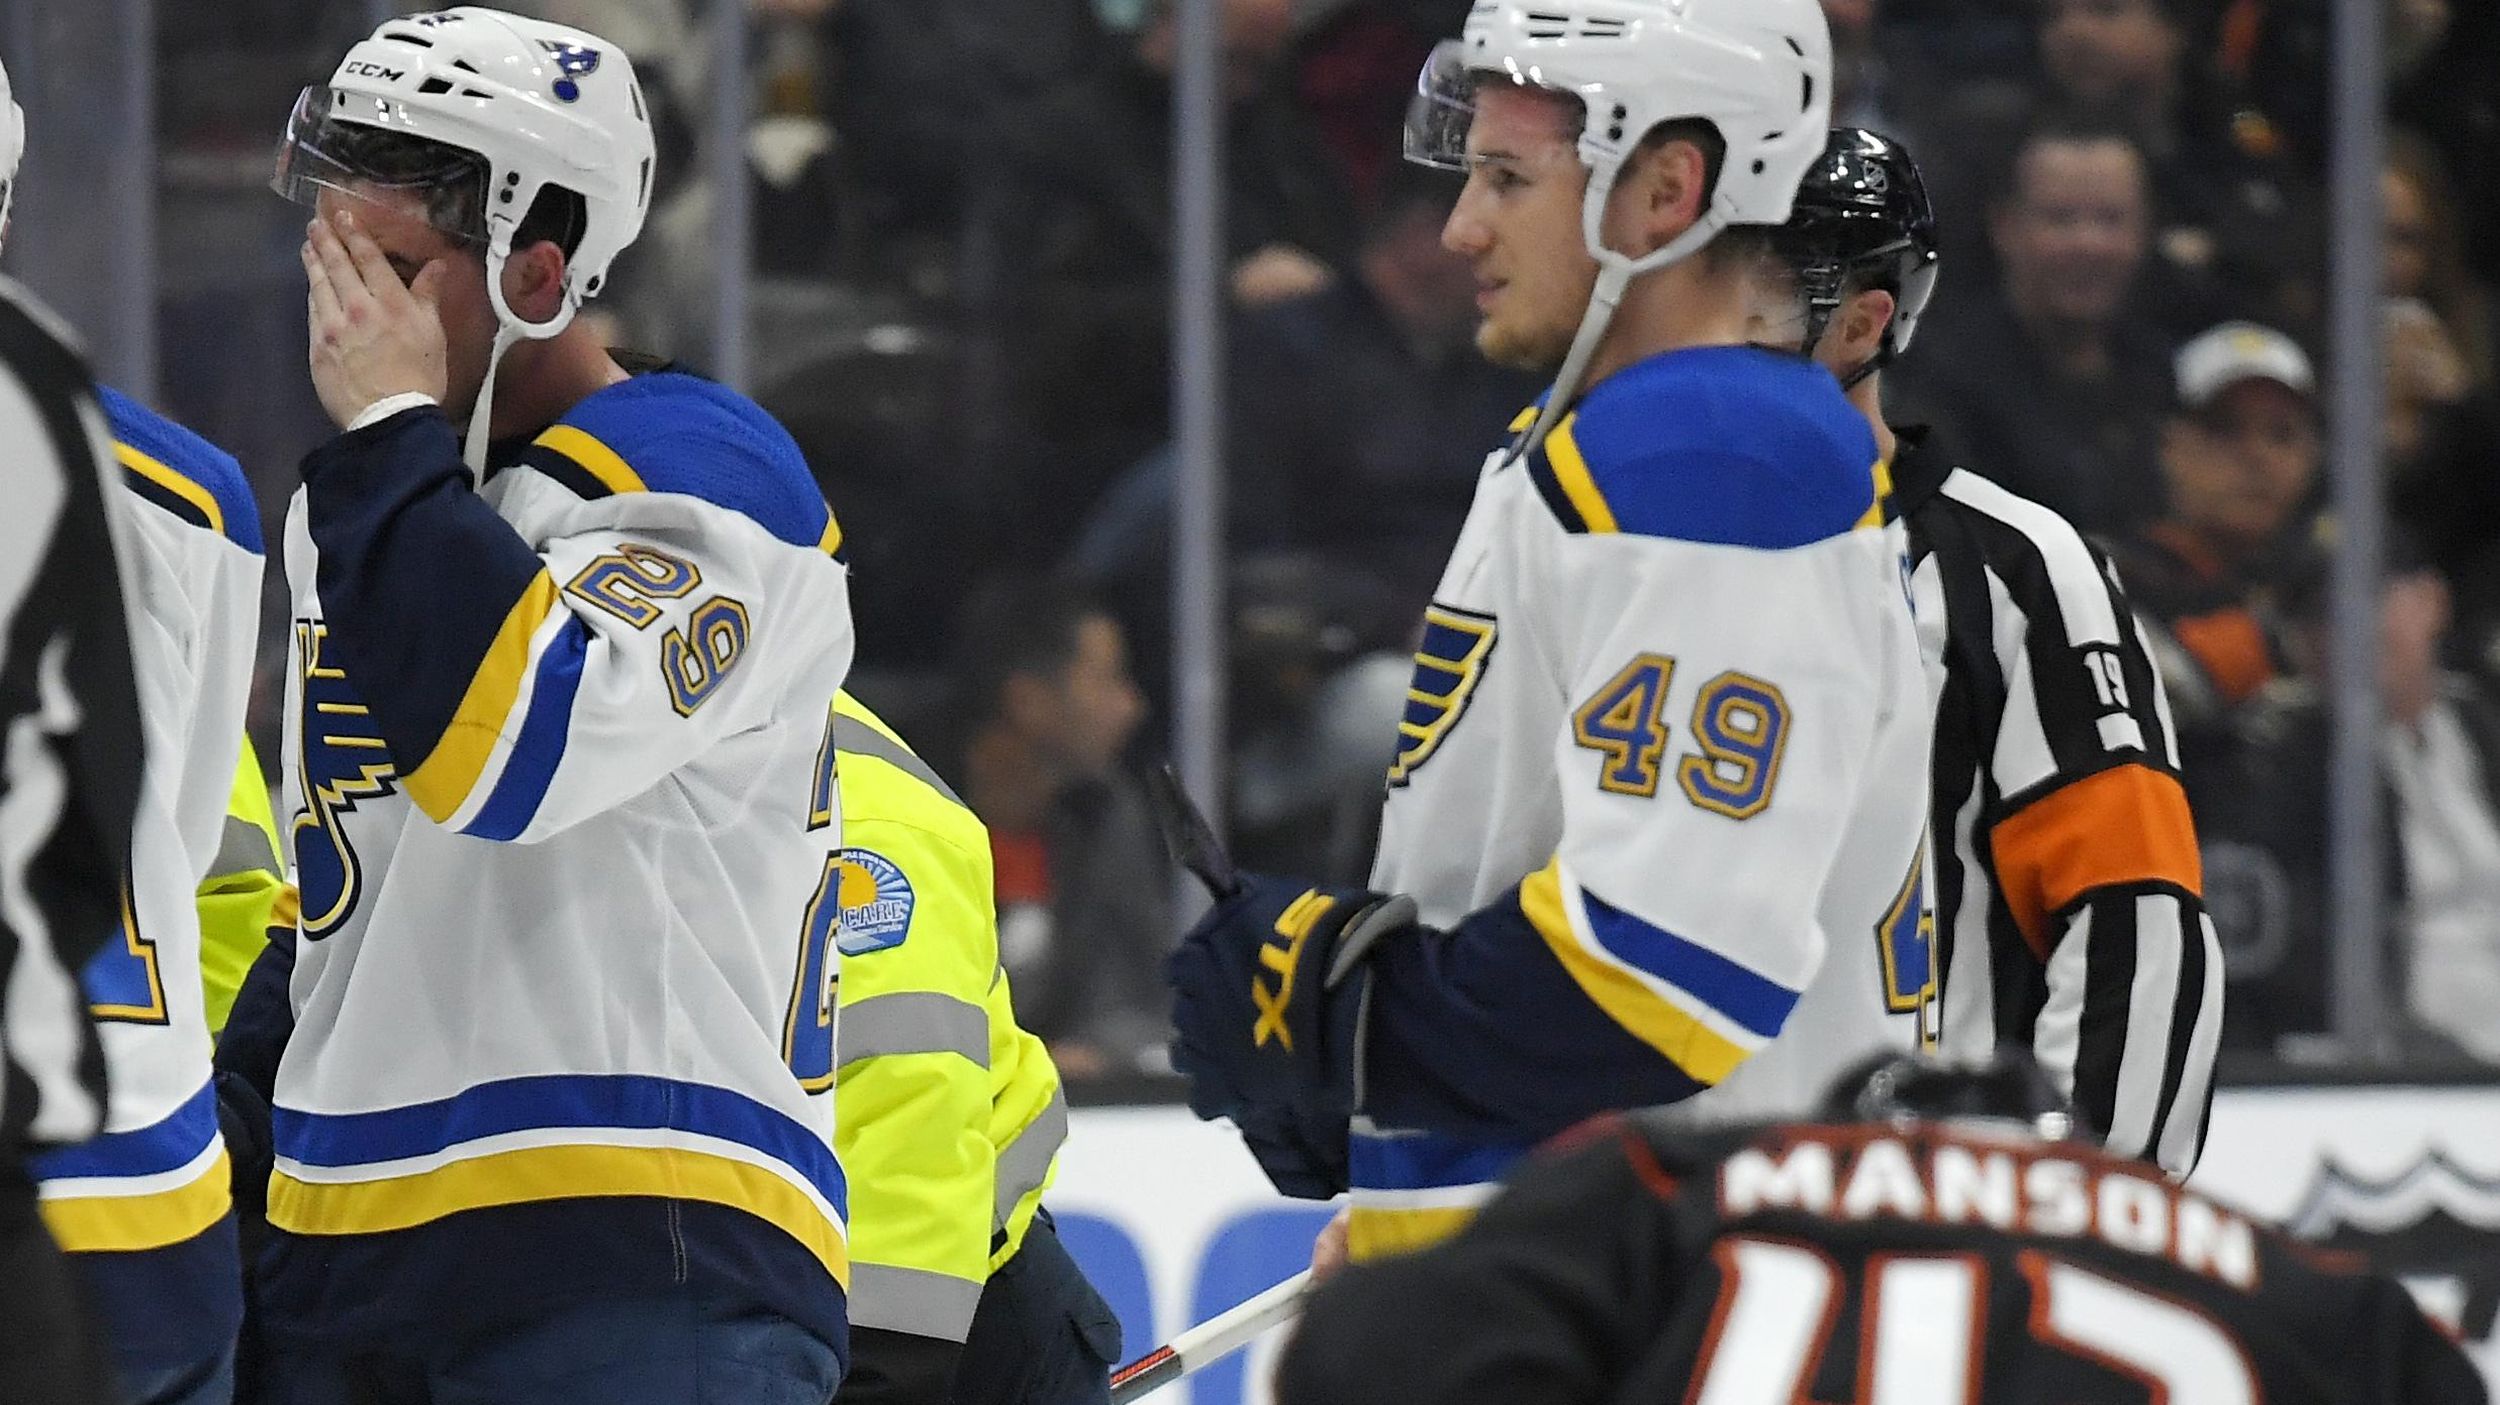 St. Louis Blues defenseman collapses on bench during game in Anaheim -  ABC17NEWS